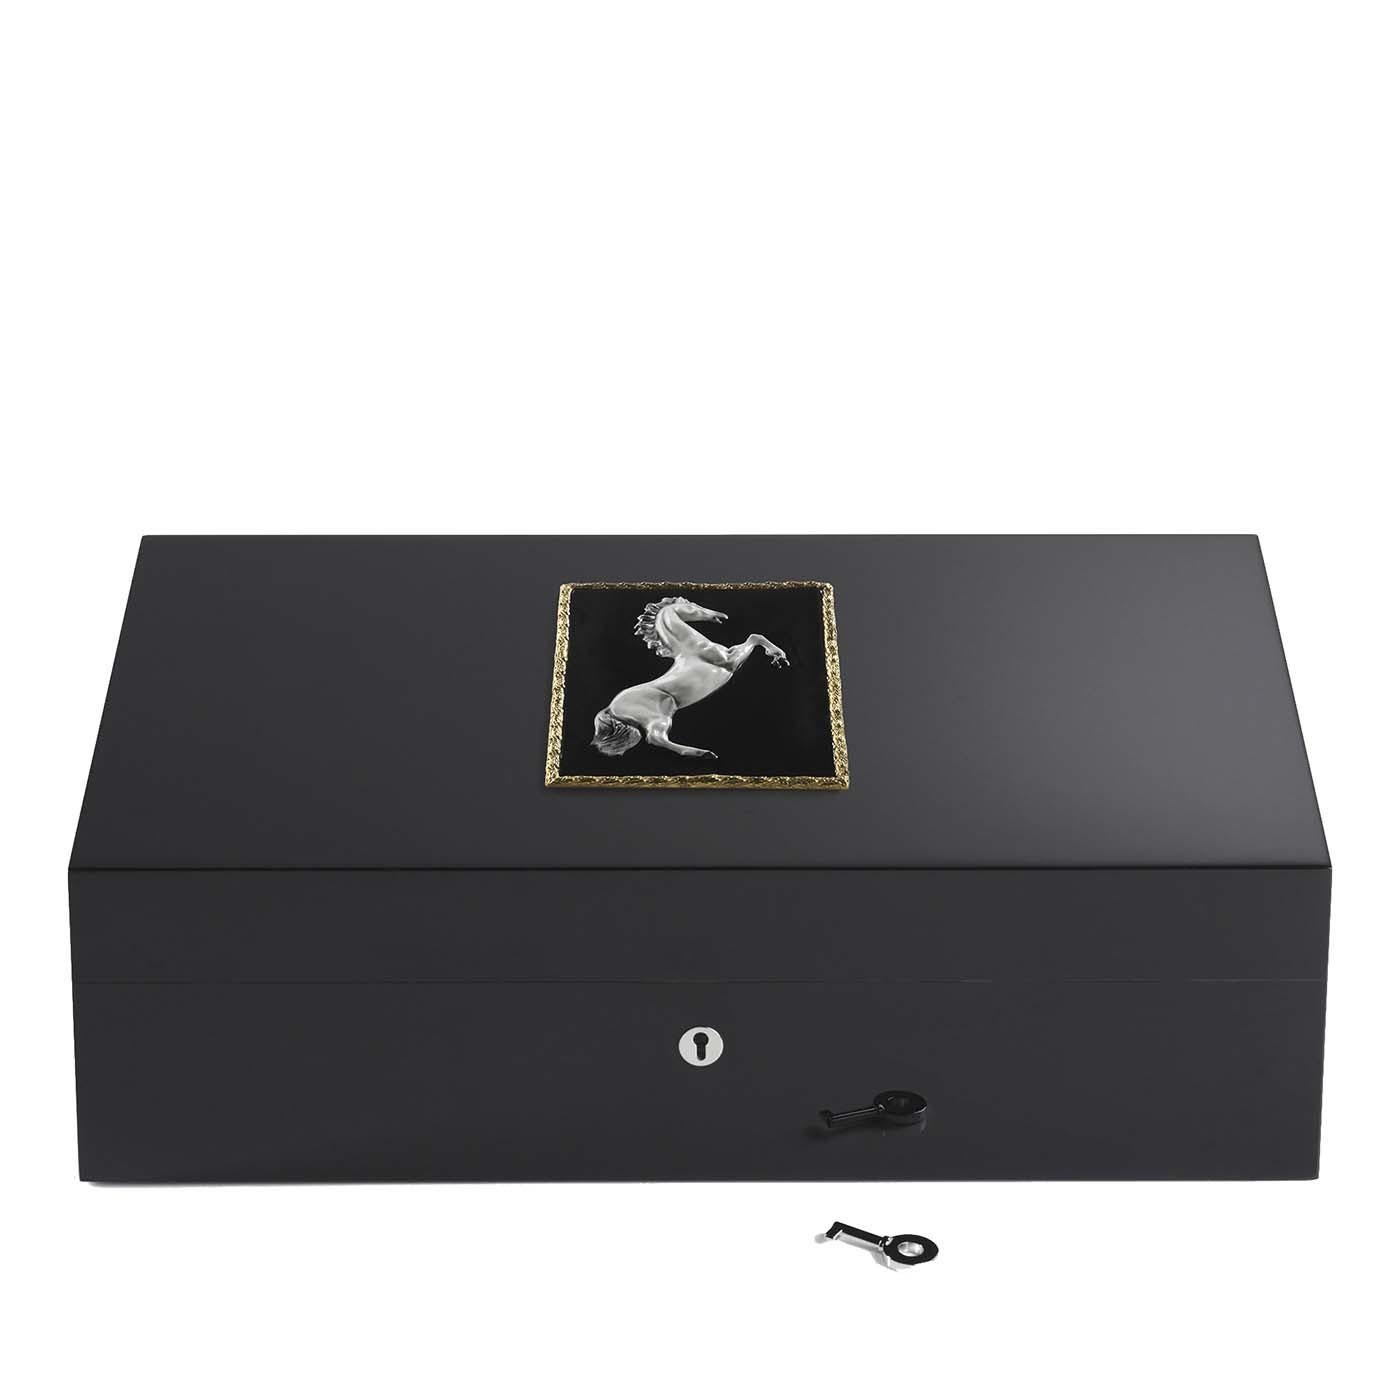 This sophisticated wooden humidor contains up to 110 cigars. Its structure painted black boasts a surface smooth to the touch. A polished decoration gracing the lid depicts a fierce horse with a silver finish, while the black background is enclosed